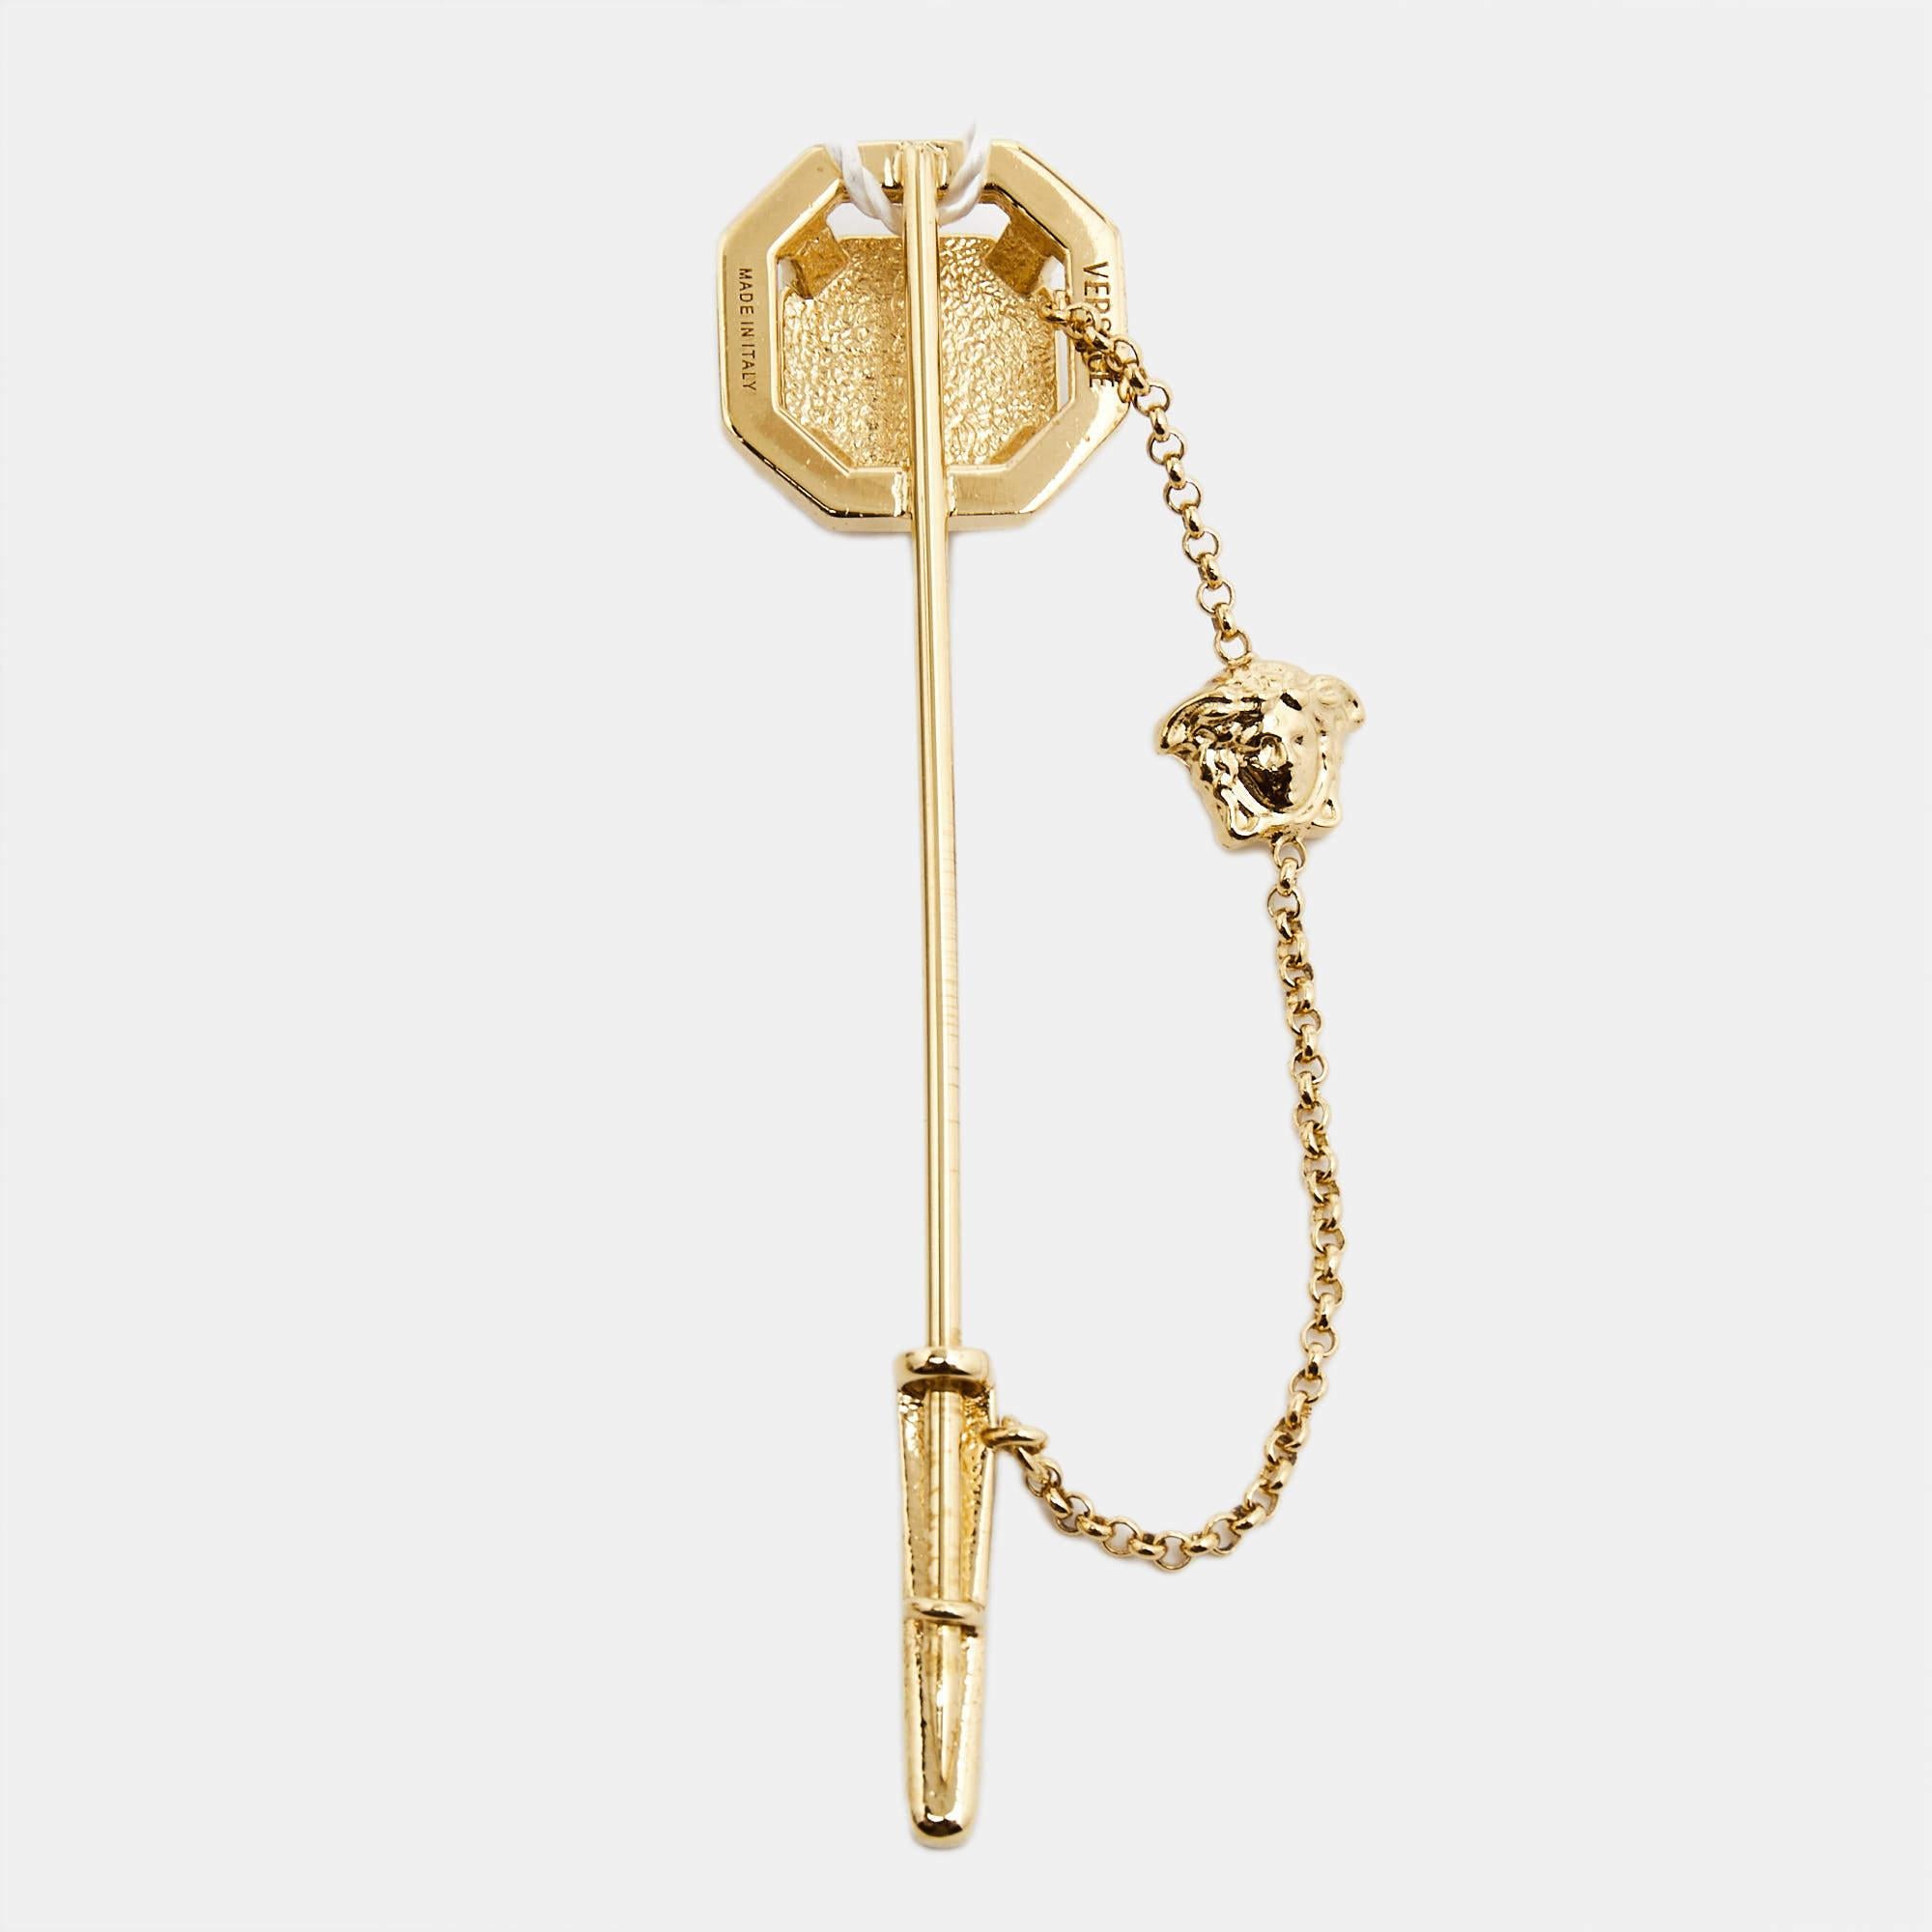 Made by Versace, the brooch will elevate your look in the best way possible. Perfect pick to accessorize your clothes!

Includes: Original Box, Original Case

